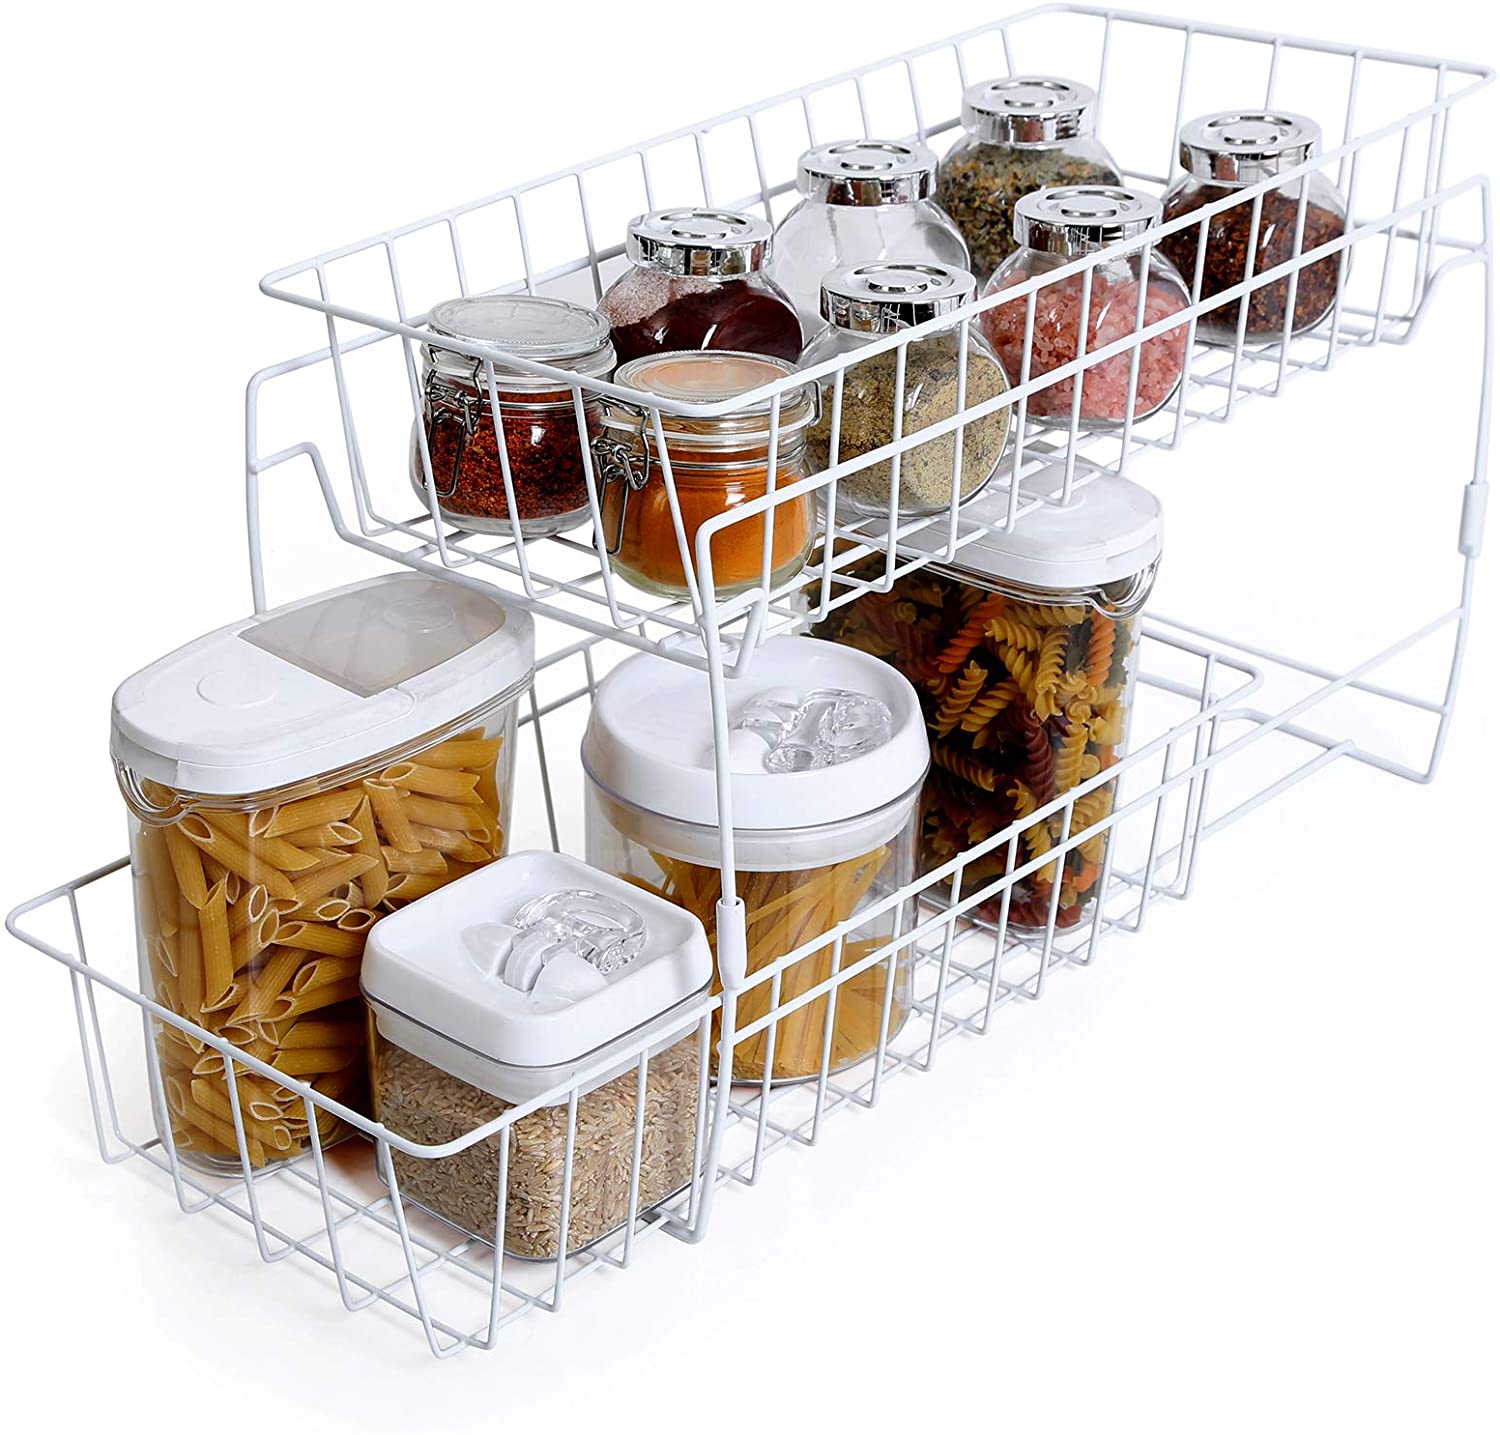 1 piece of drawer storage rack in the cabinet, kitchen storage basket,  layered spices, dishes, pull-out storage box under the sink